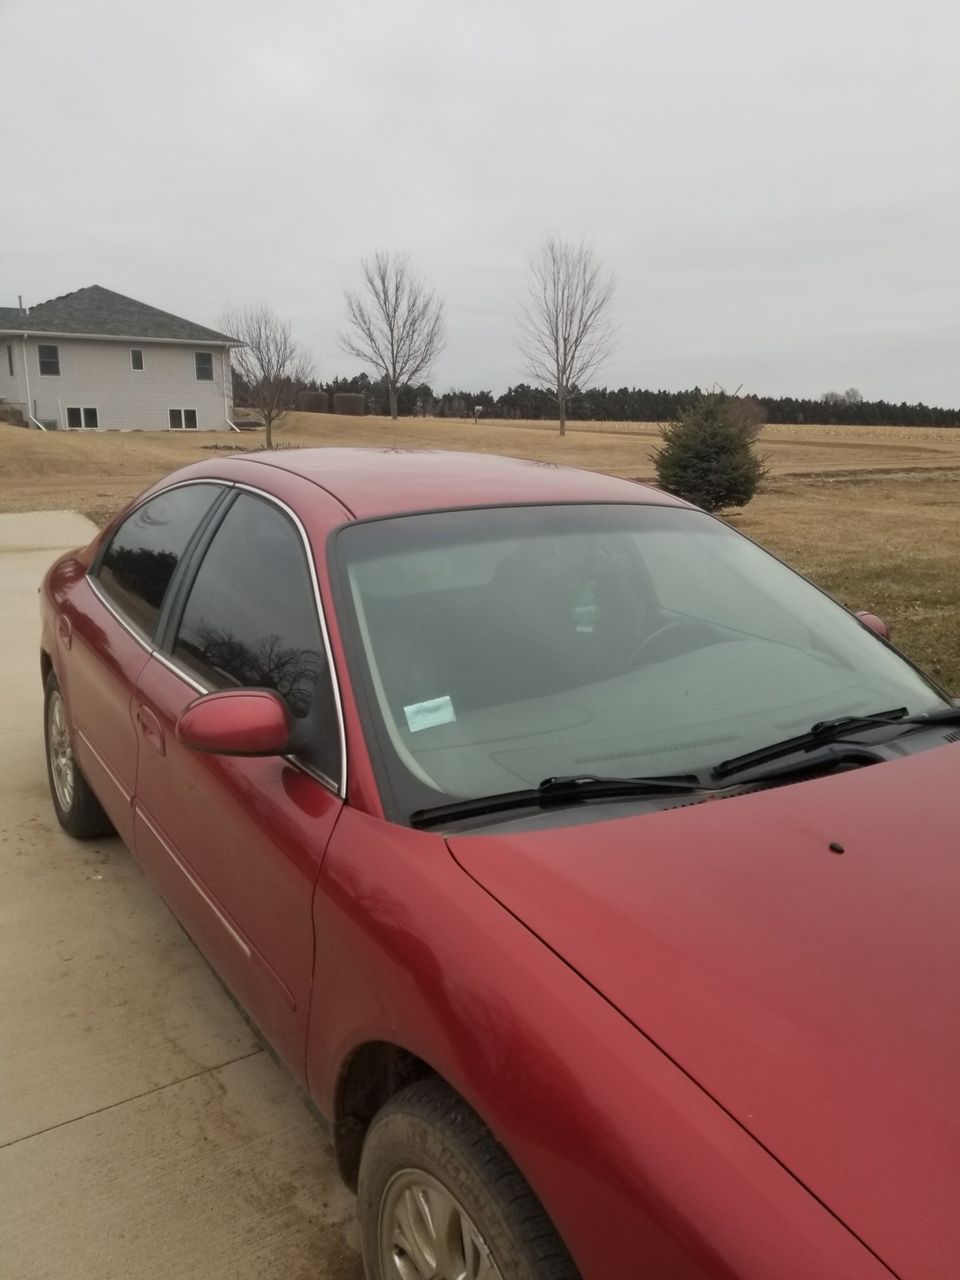 2002 Mercury Sable | Sioux Falls, SD, Matador Red Clearcoat Metallic (Red & Orange), Front Wheel